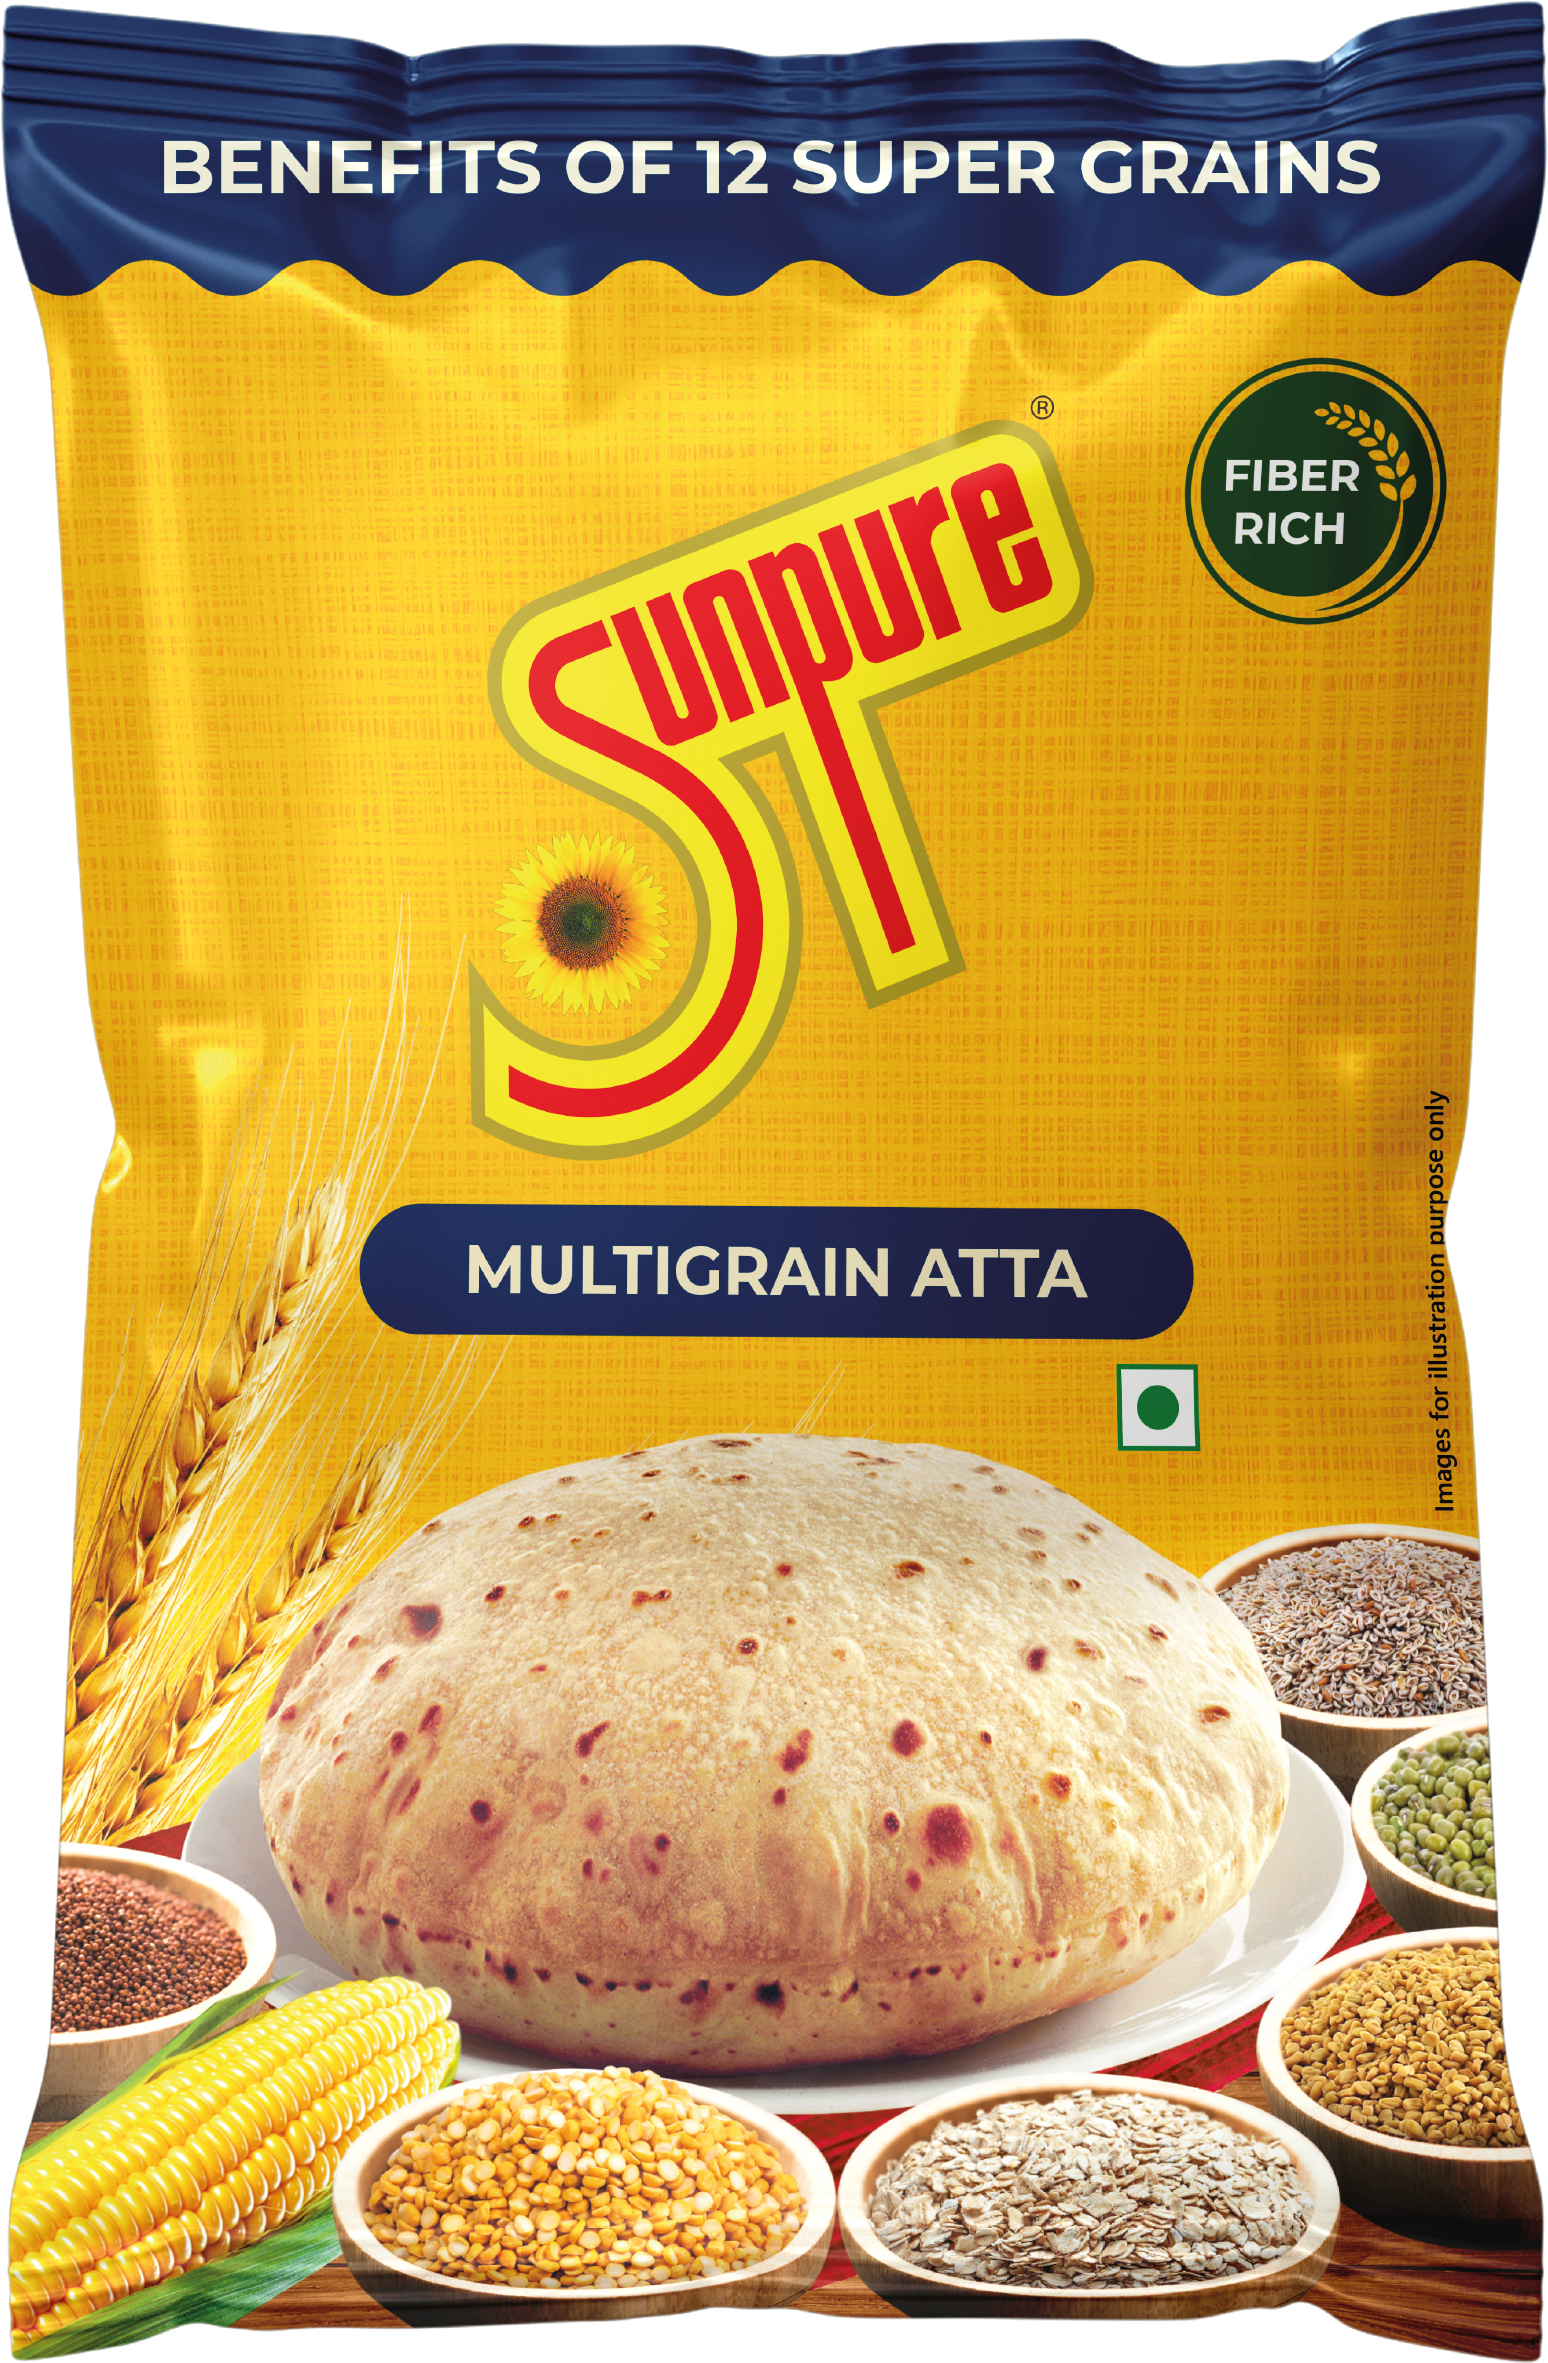 Sunpure launches multigrain atta with highest millets composition